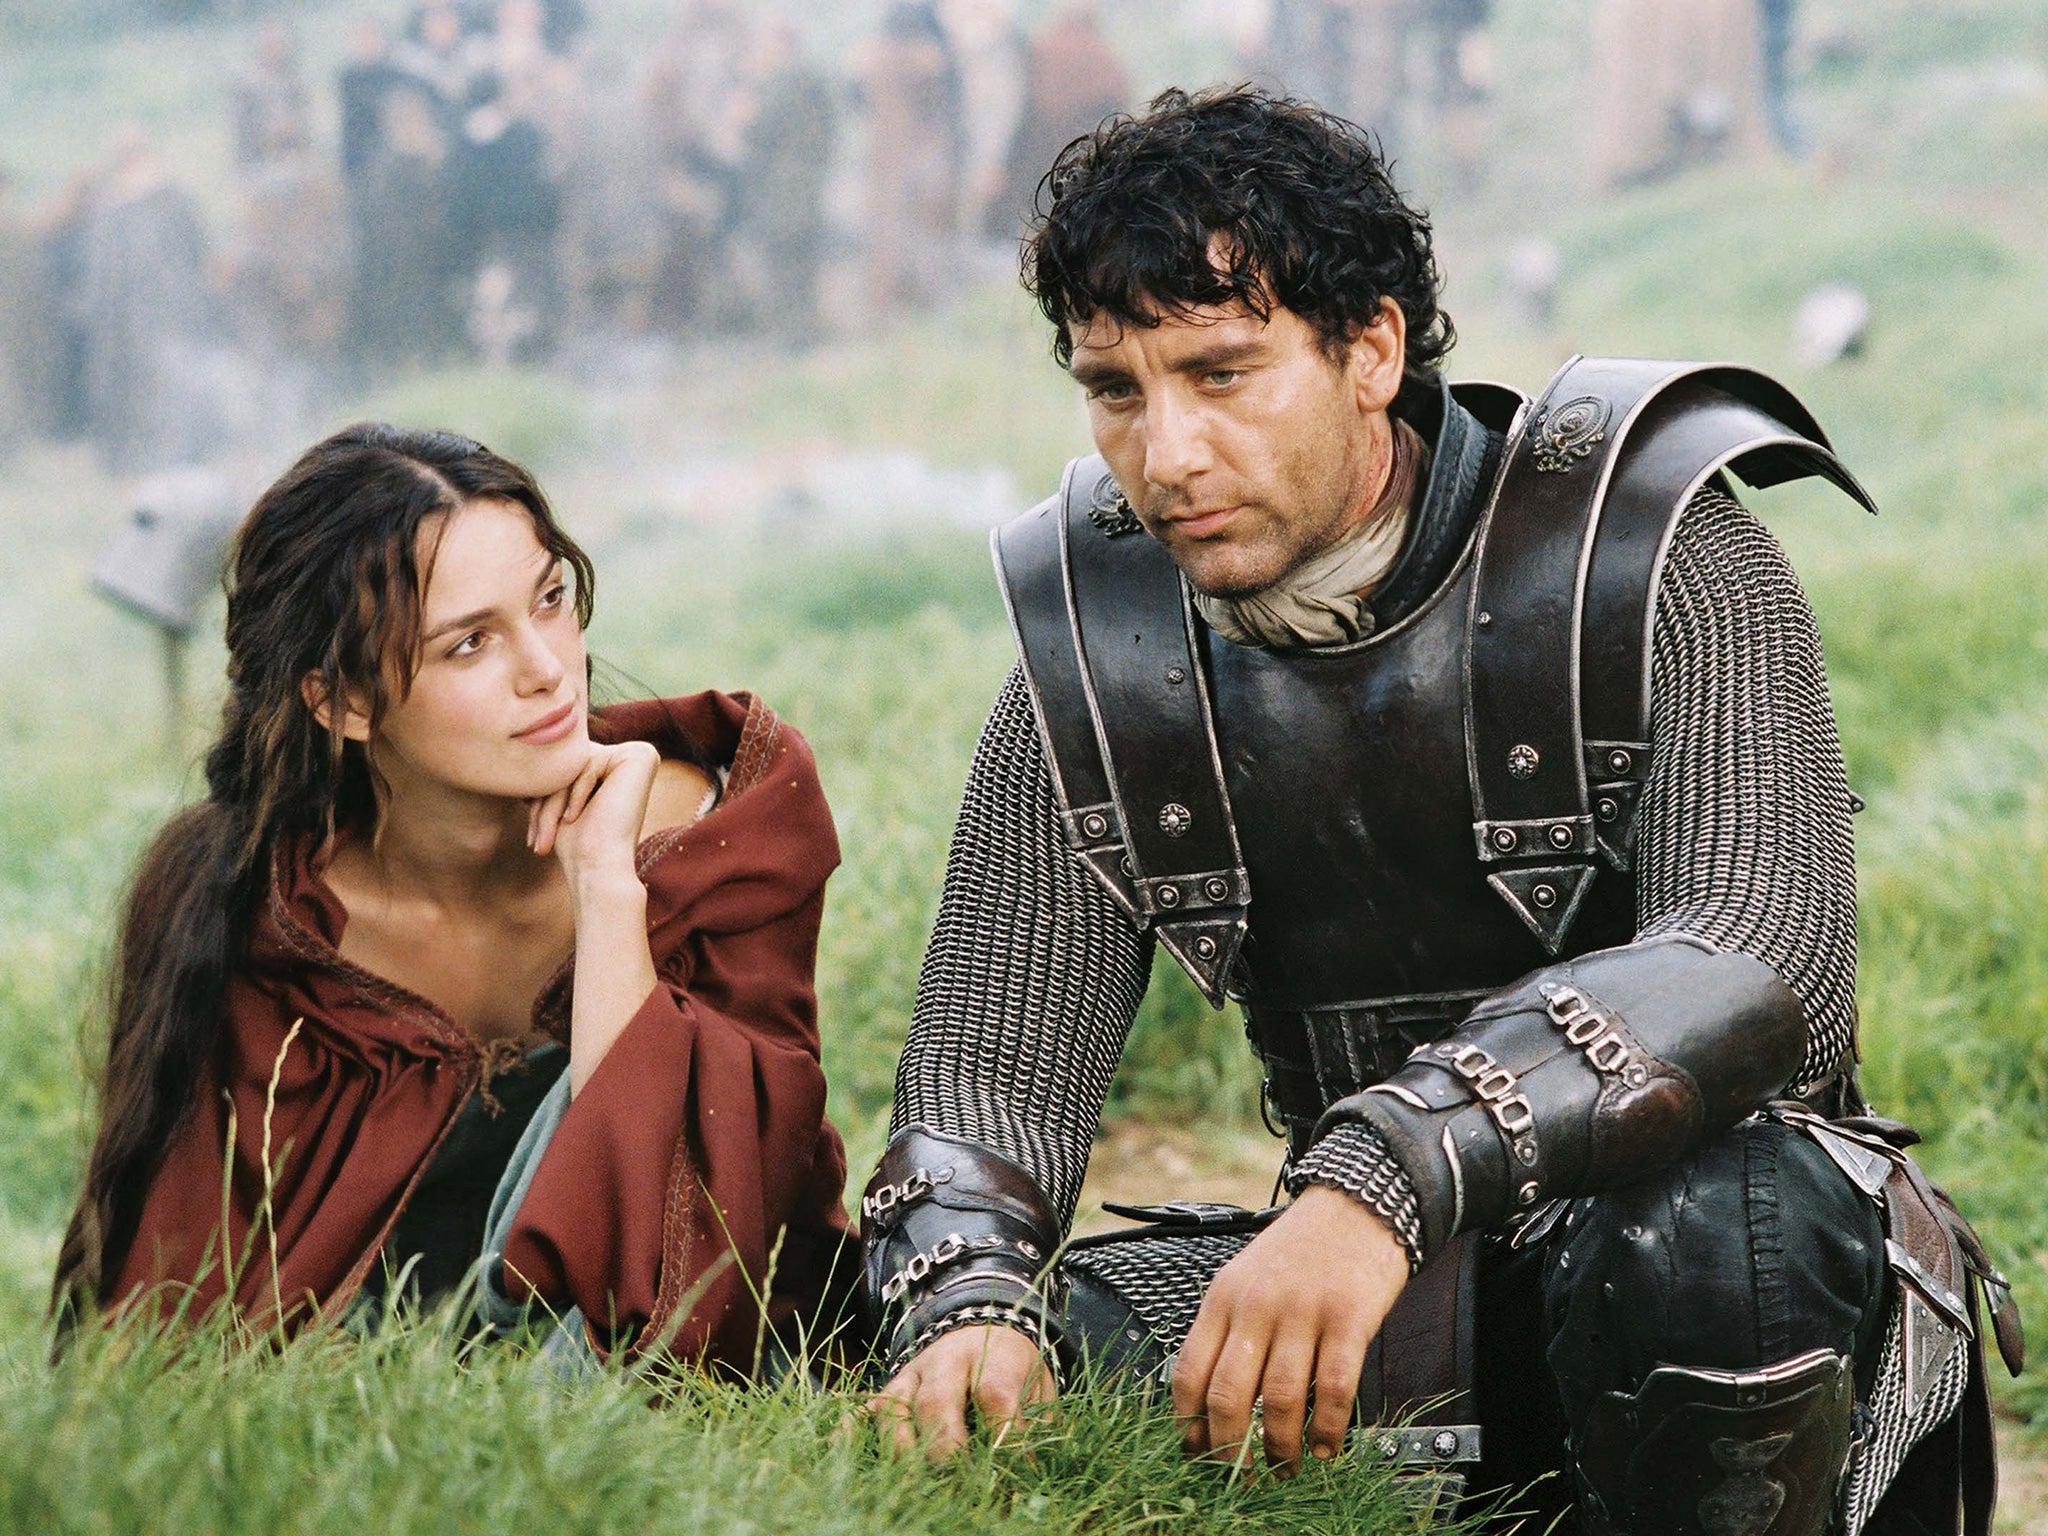 Legendary charm: Clive Owen and Keira Knightley in 2004’s ‘King Arthur’